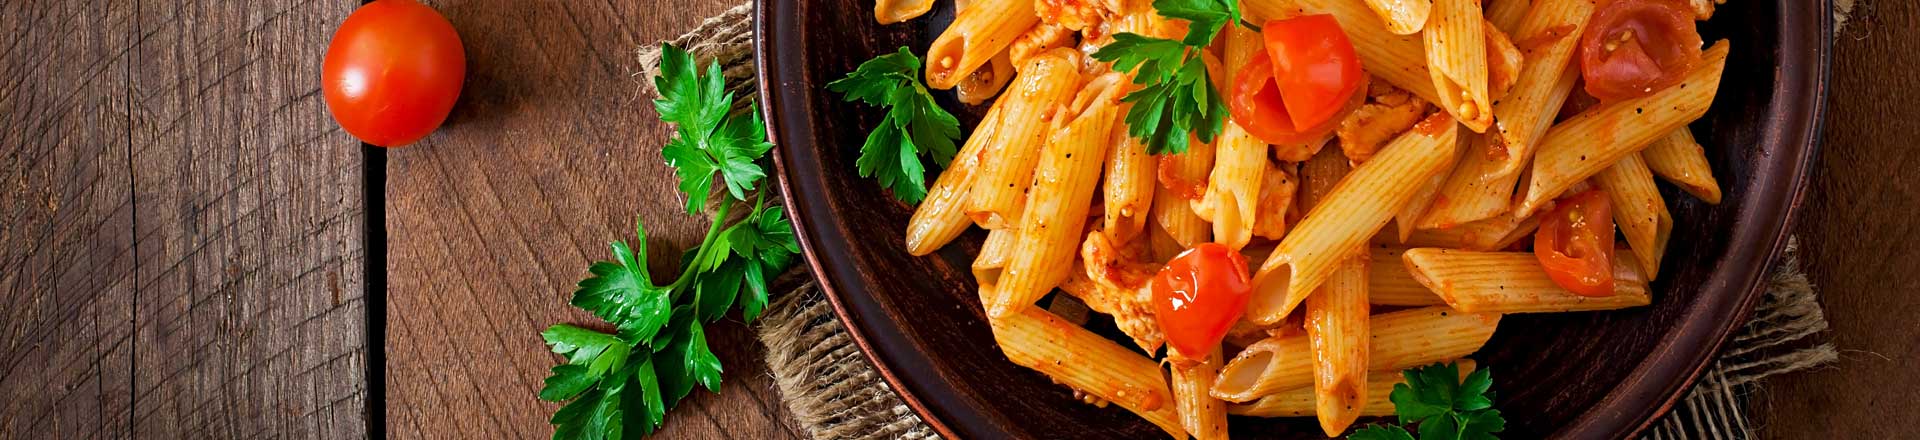 a healthy pasta dinner starts with the freshest ingredients